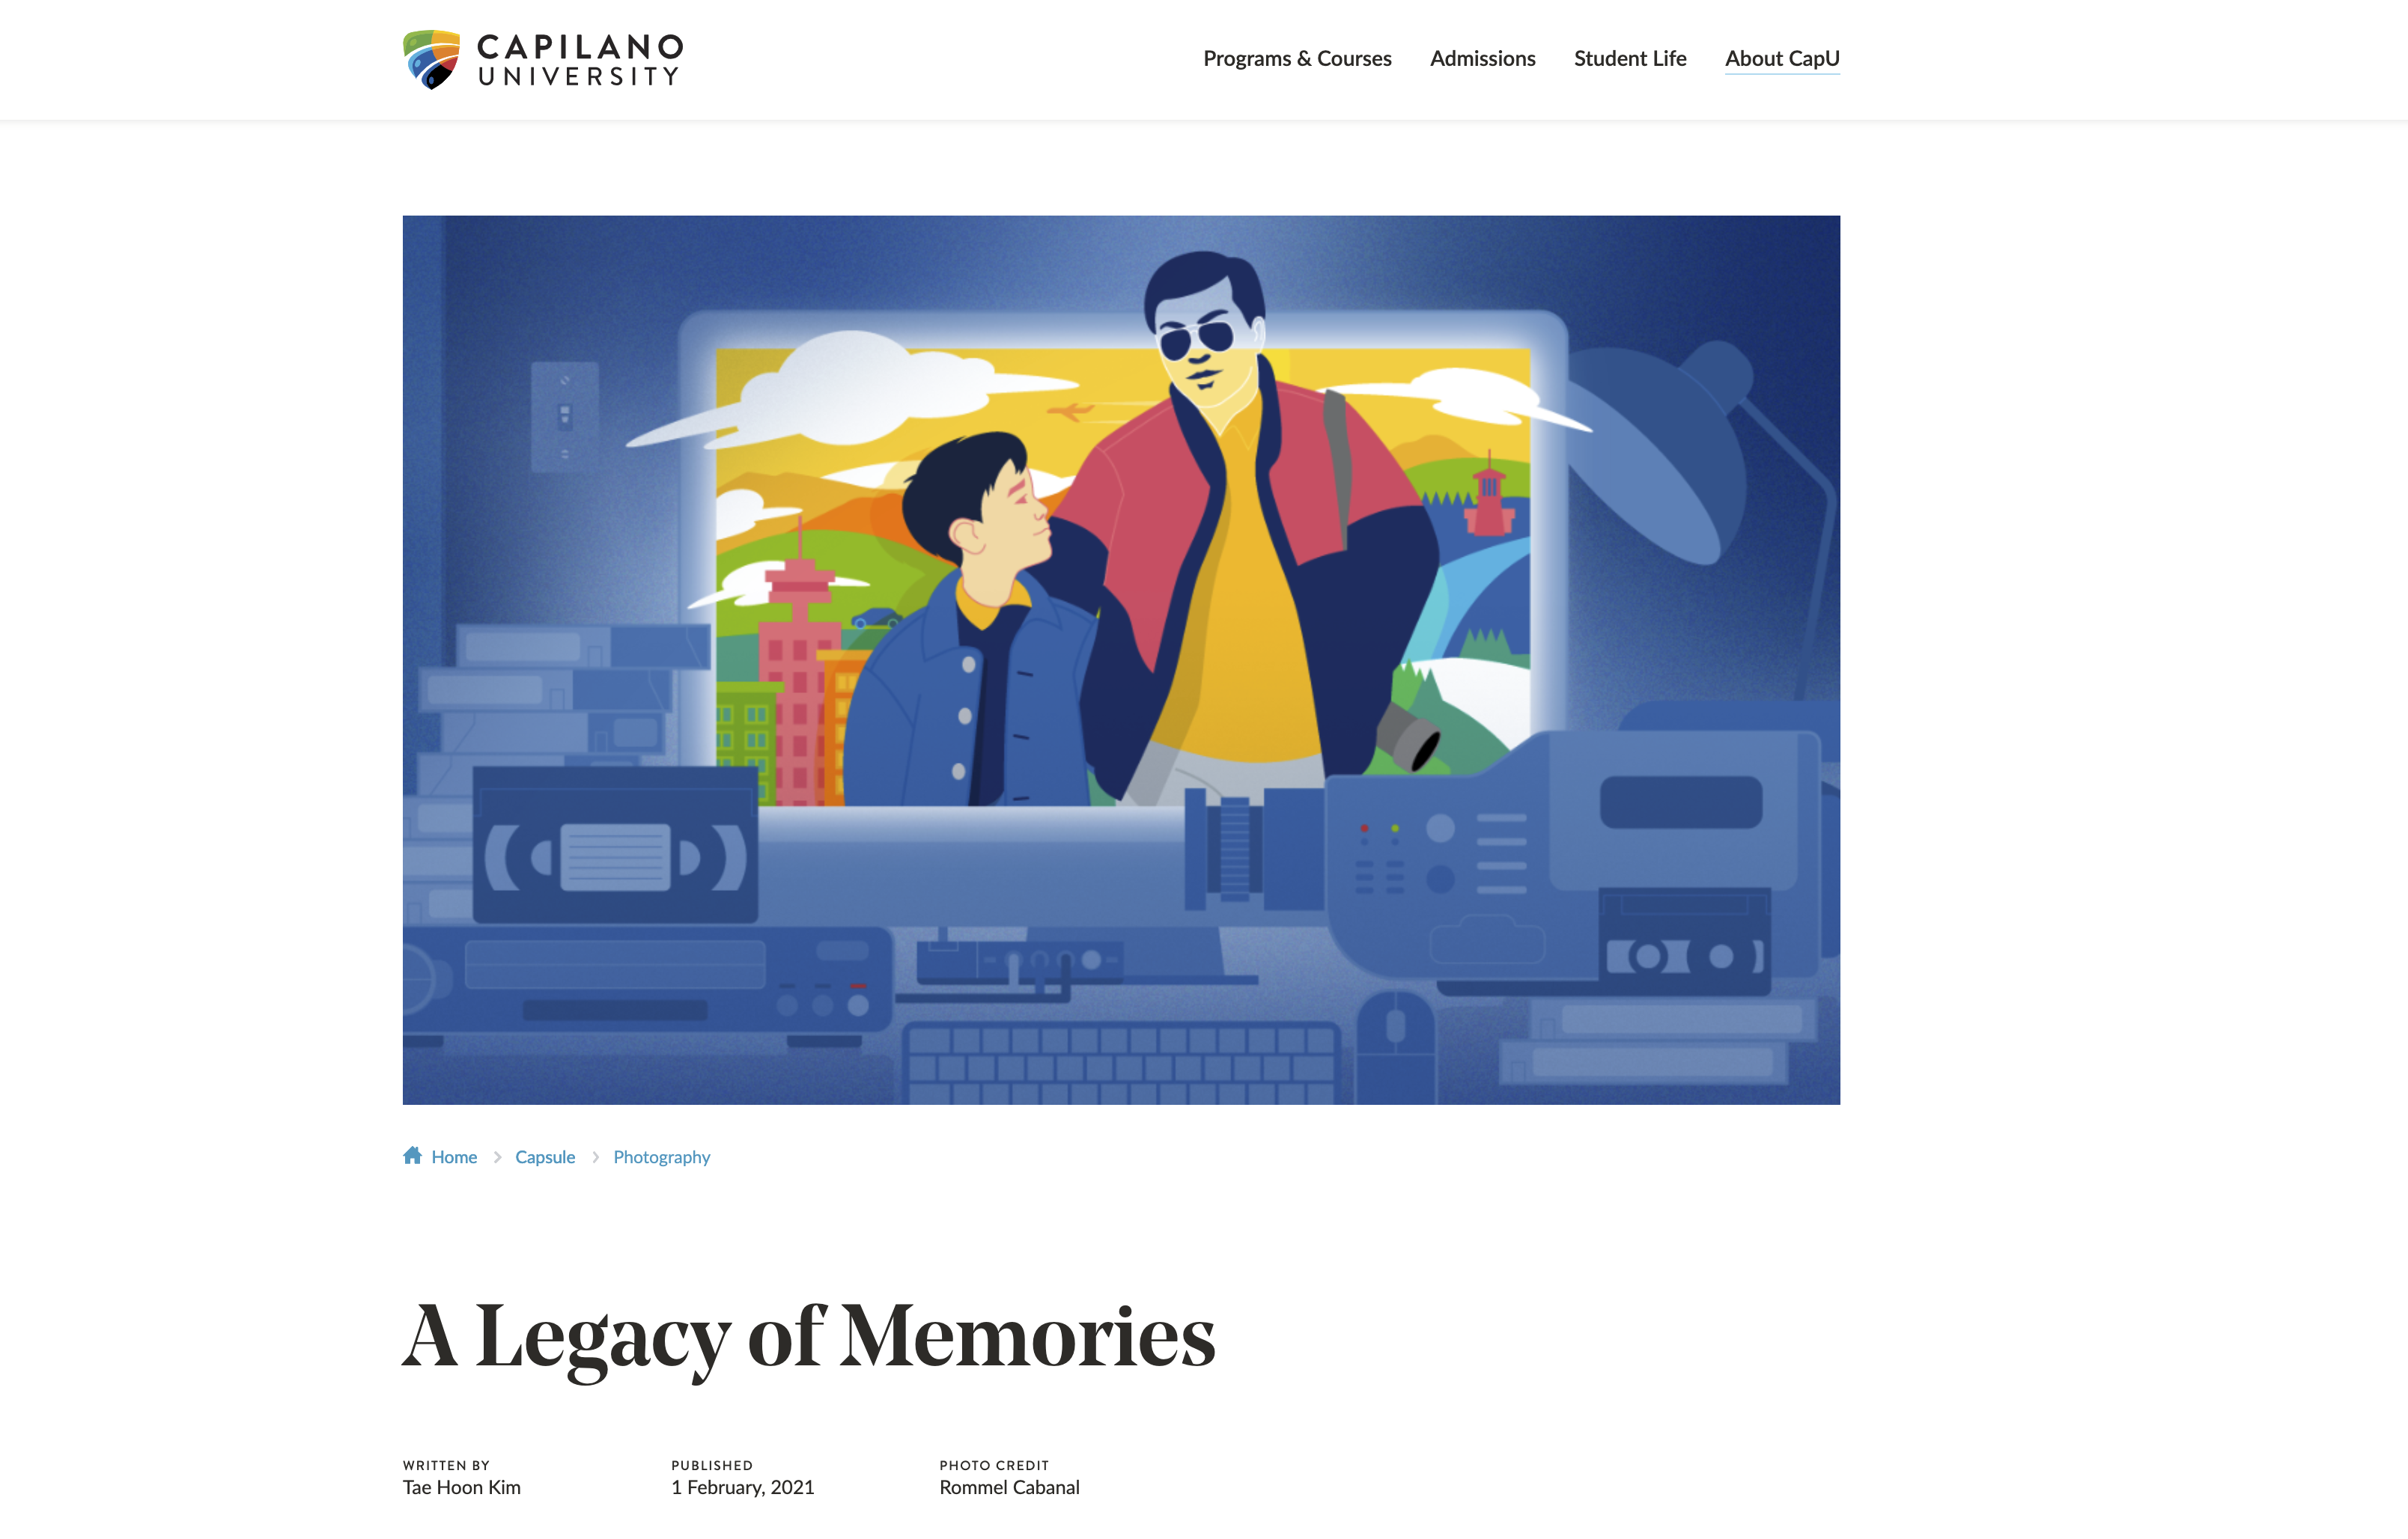 Thumbnail of A Legacy of Memories